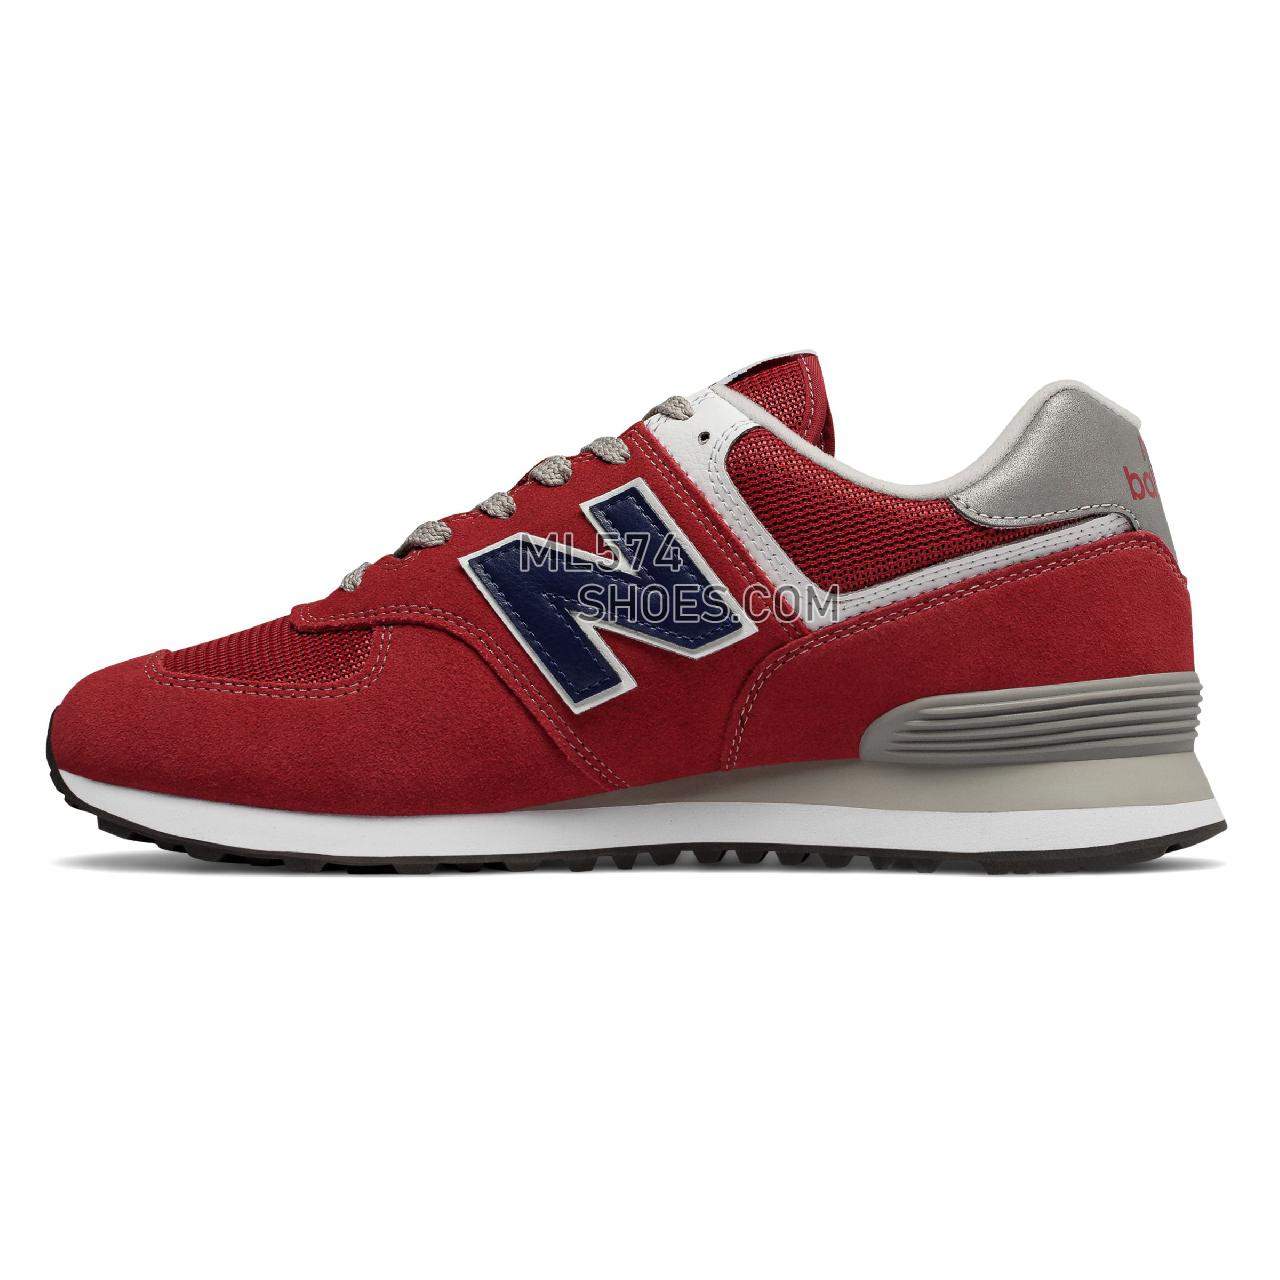 New Balance 574 - Men's 574 - Classic Red with Blue - ML574ATR